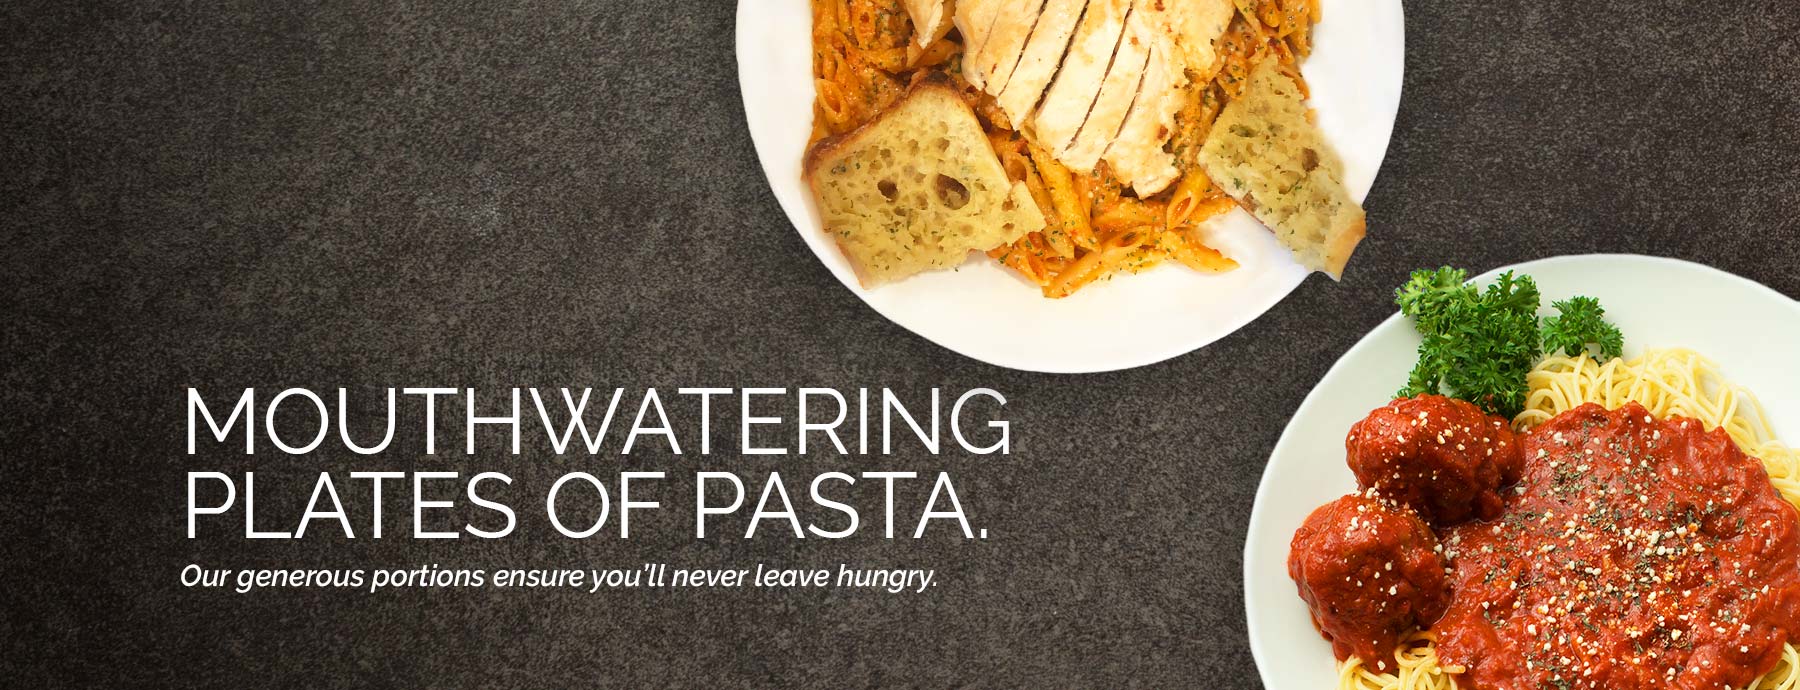 Pasta Too | restaurant | italian | Bethel Park | Pittsburgh – Pasta Too is  Pittsburgh's finest family Italian restaurant serving authentic italian  cuisine, including scratch-made pastas, select salads, fine wines and